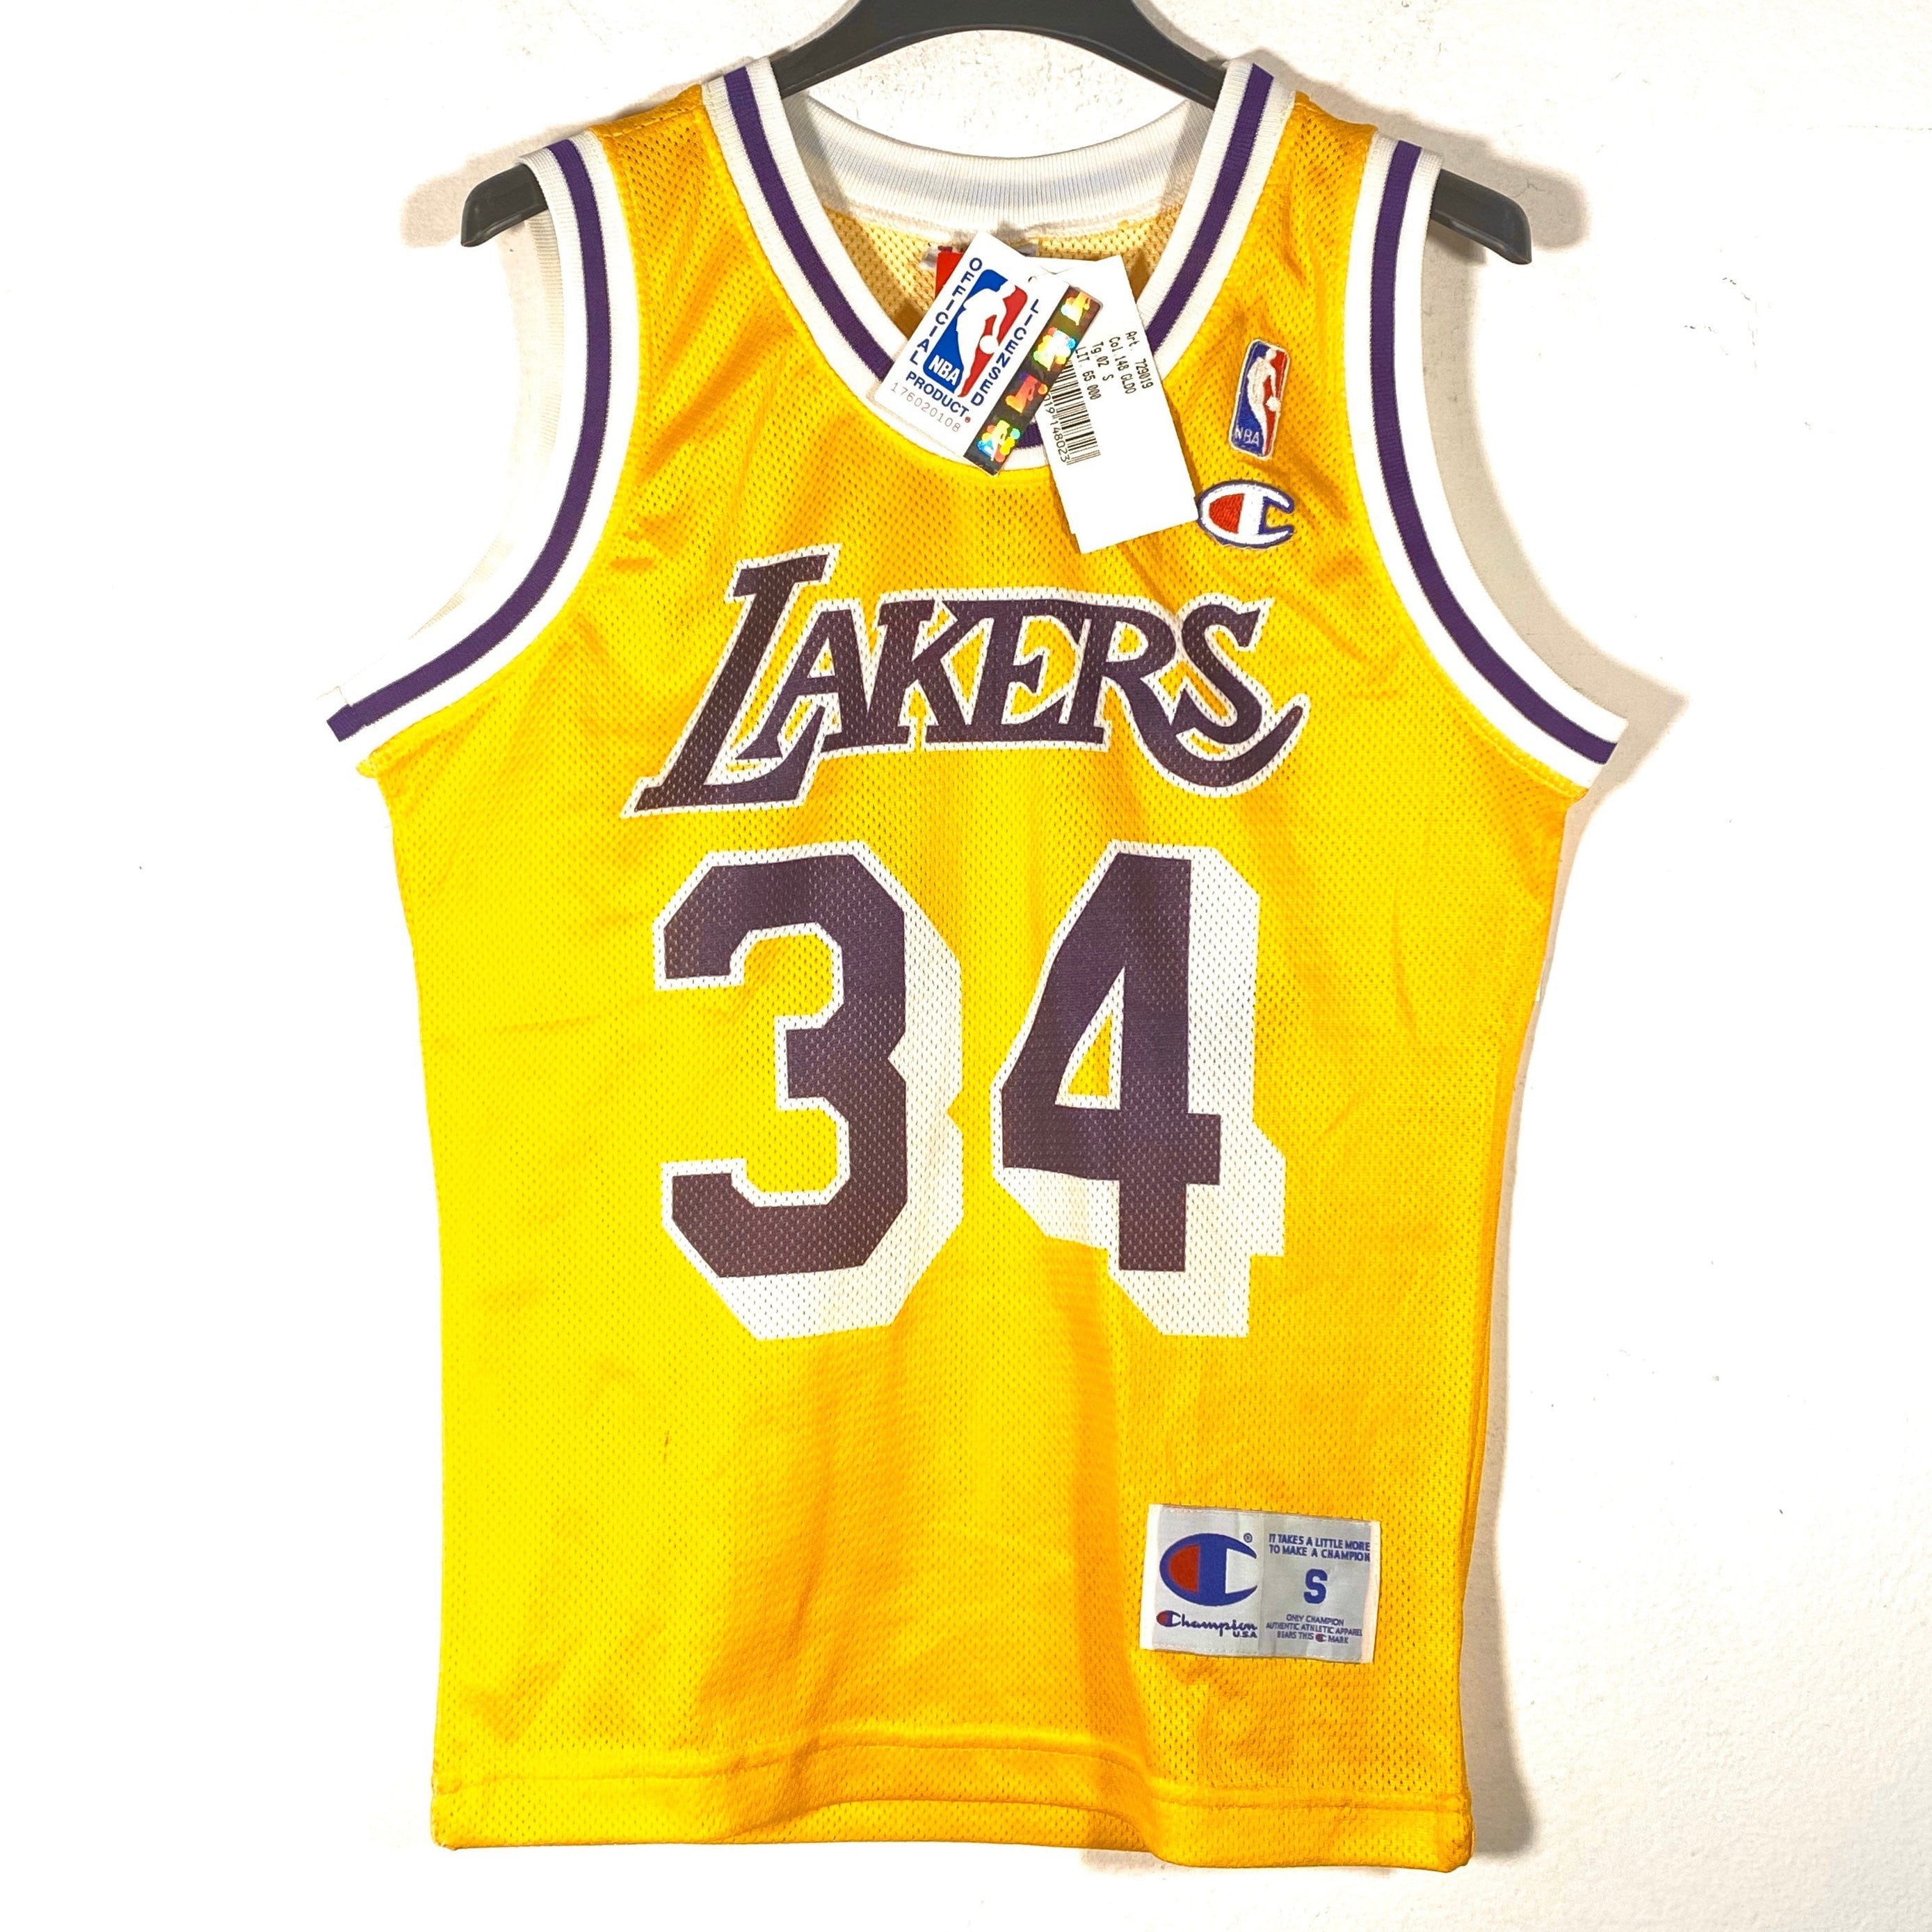 Buy Nba Jerseys Online In India At Best Price Offers